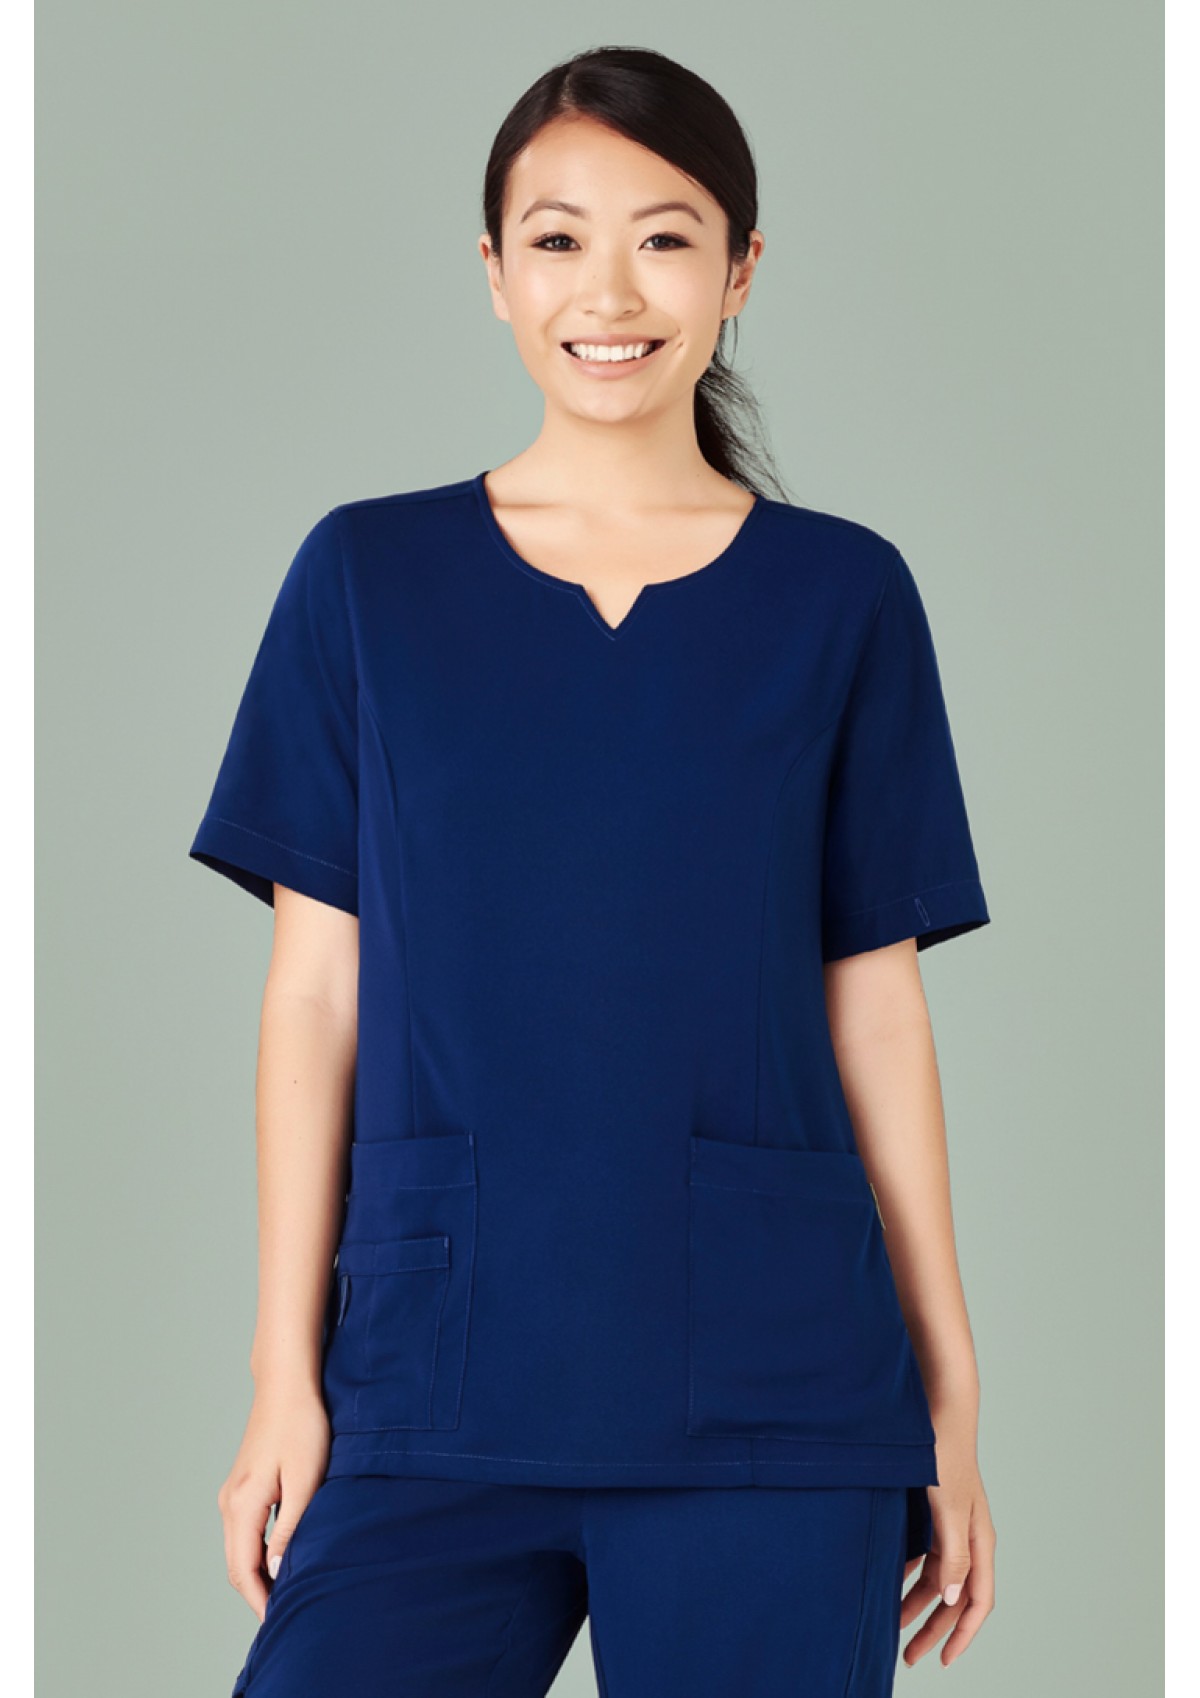 CST942LS - Womens Tailored Fit Round Neck Scrub Top